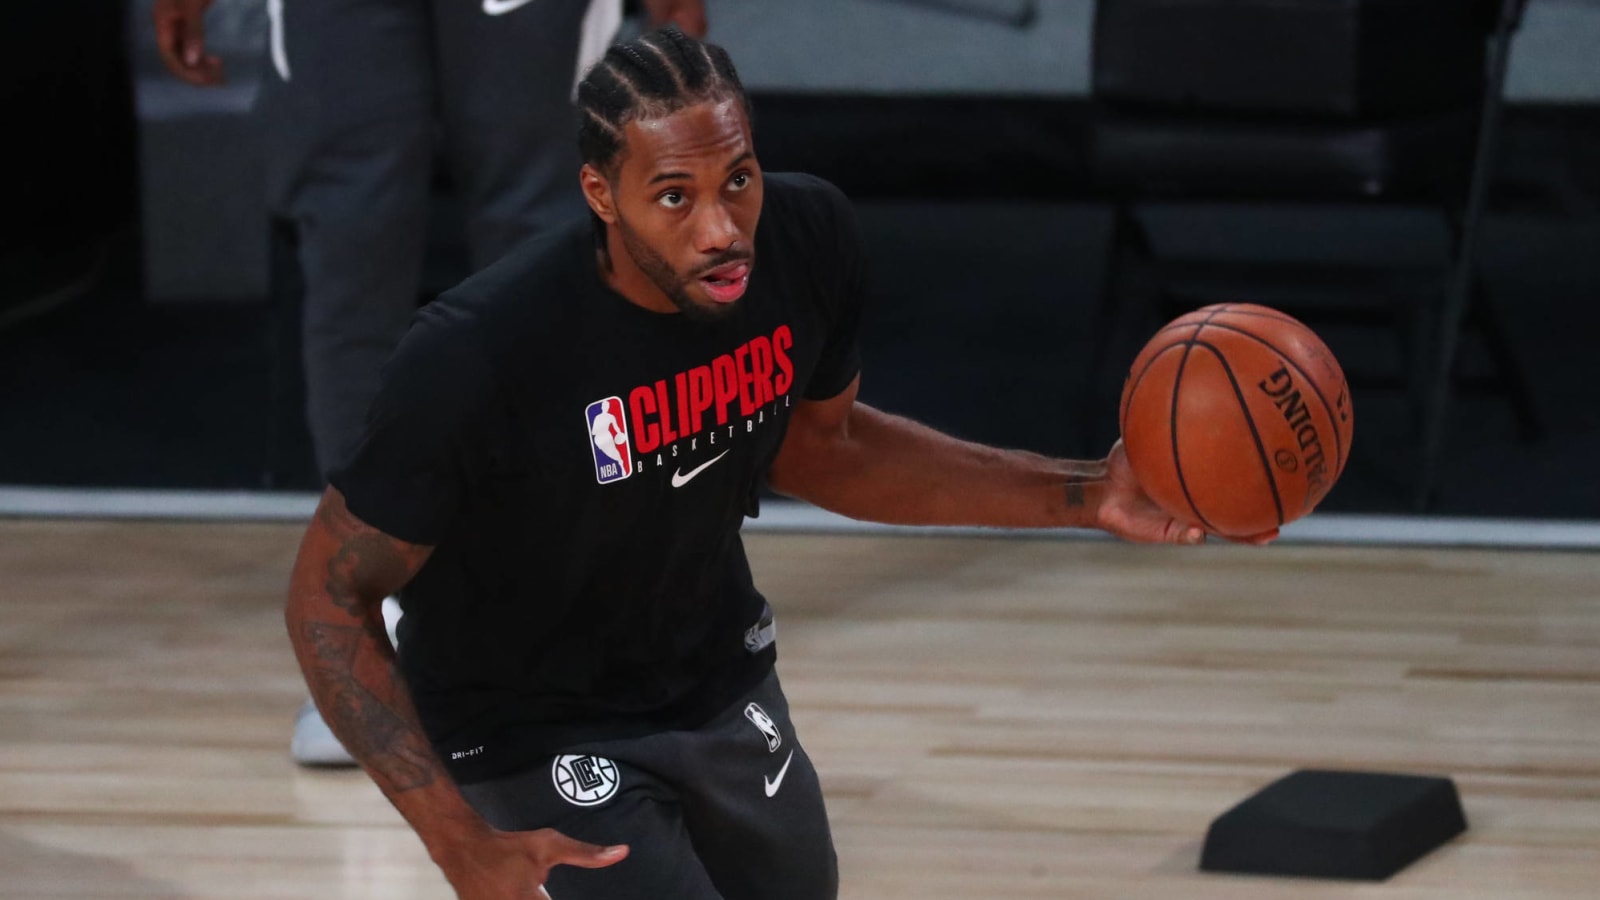 Star treatment for Kawhi bothered Clippers teammates?